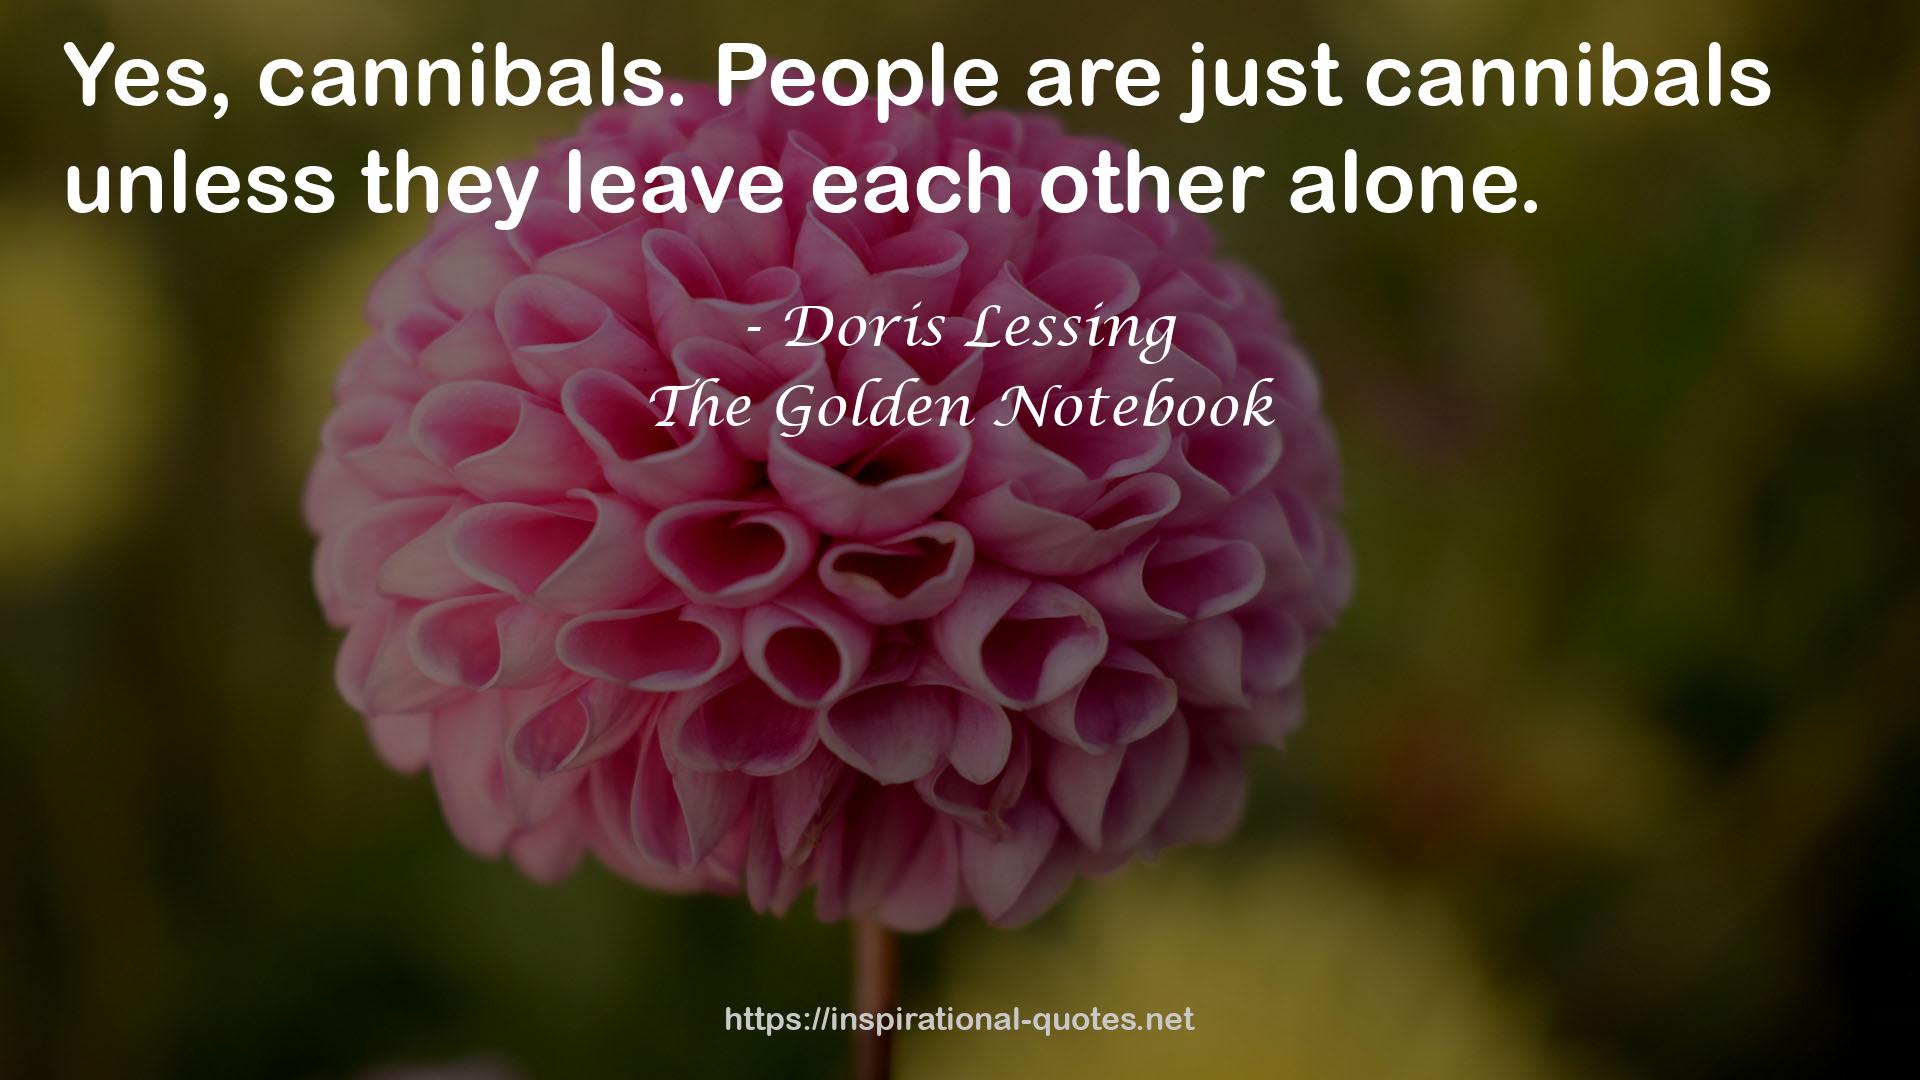 just cannibals  QUOTES